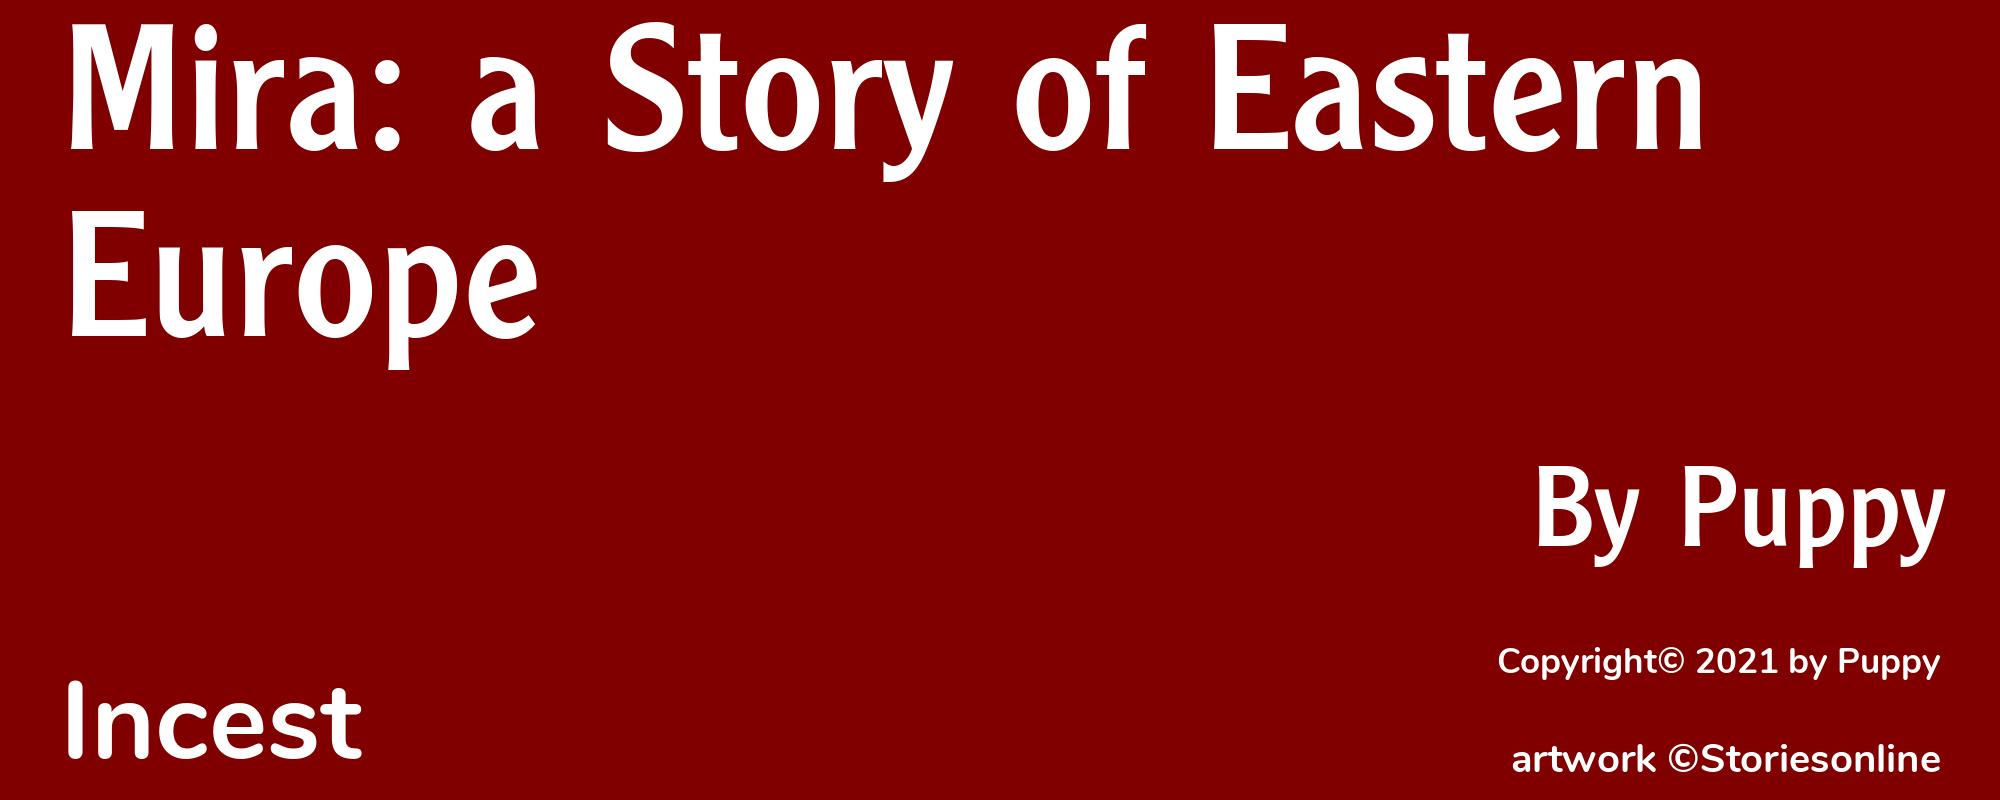 Mira: a Story of Eastern Europe - Cover